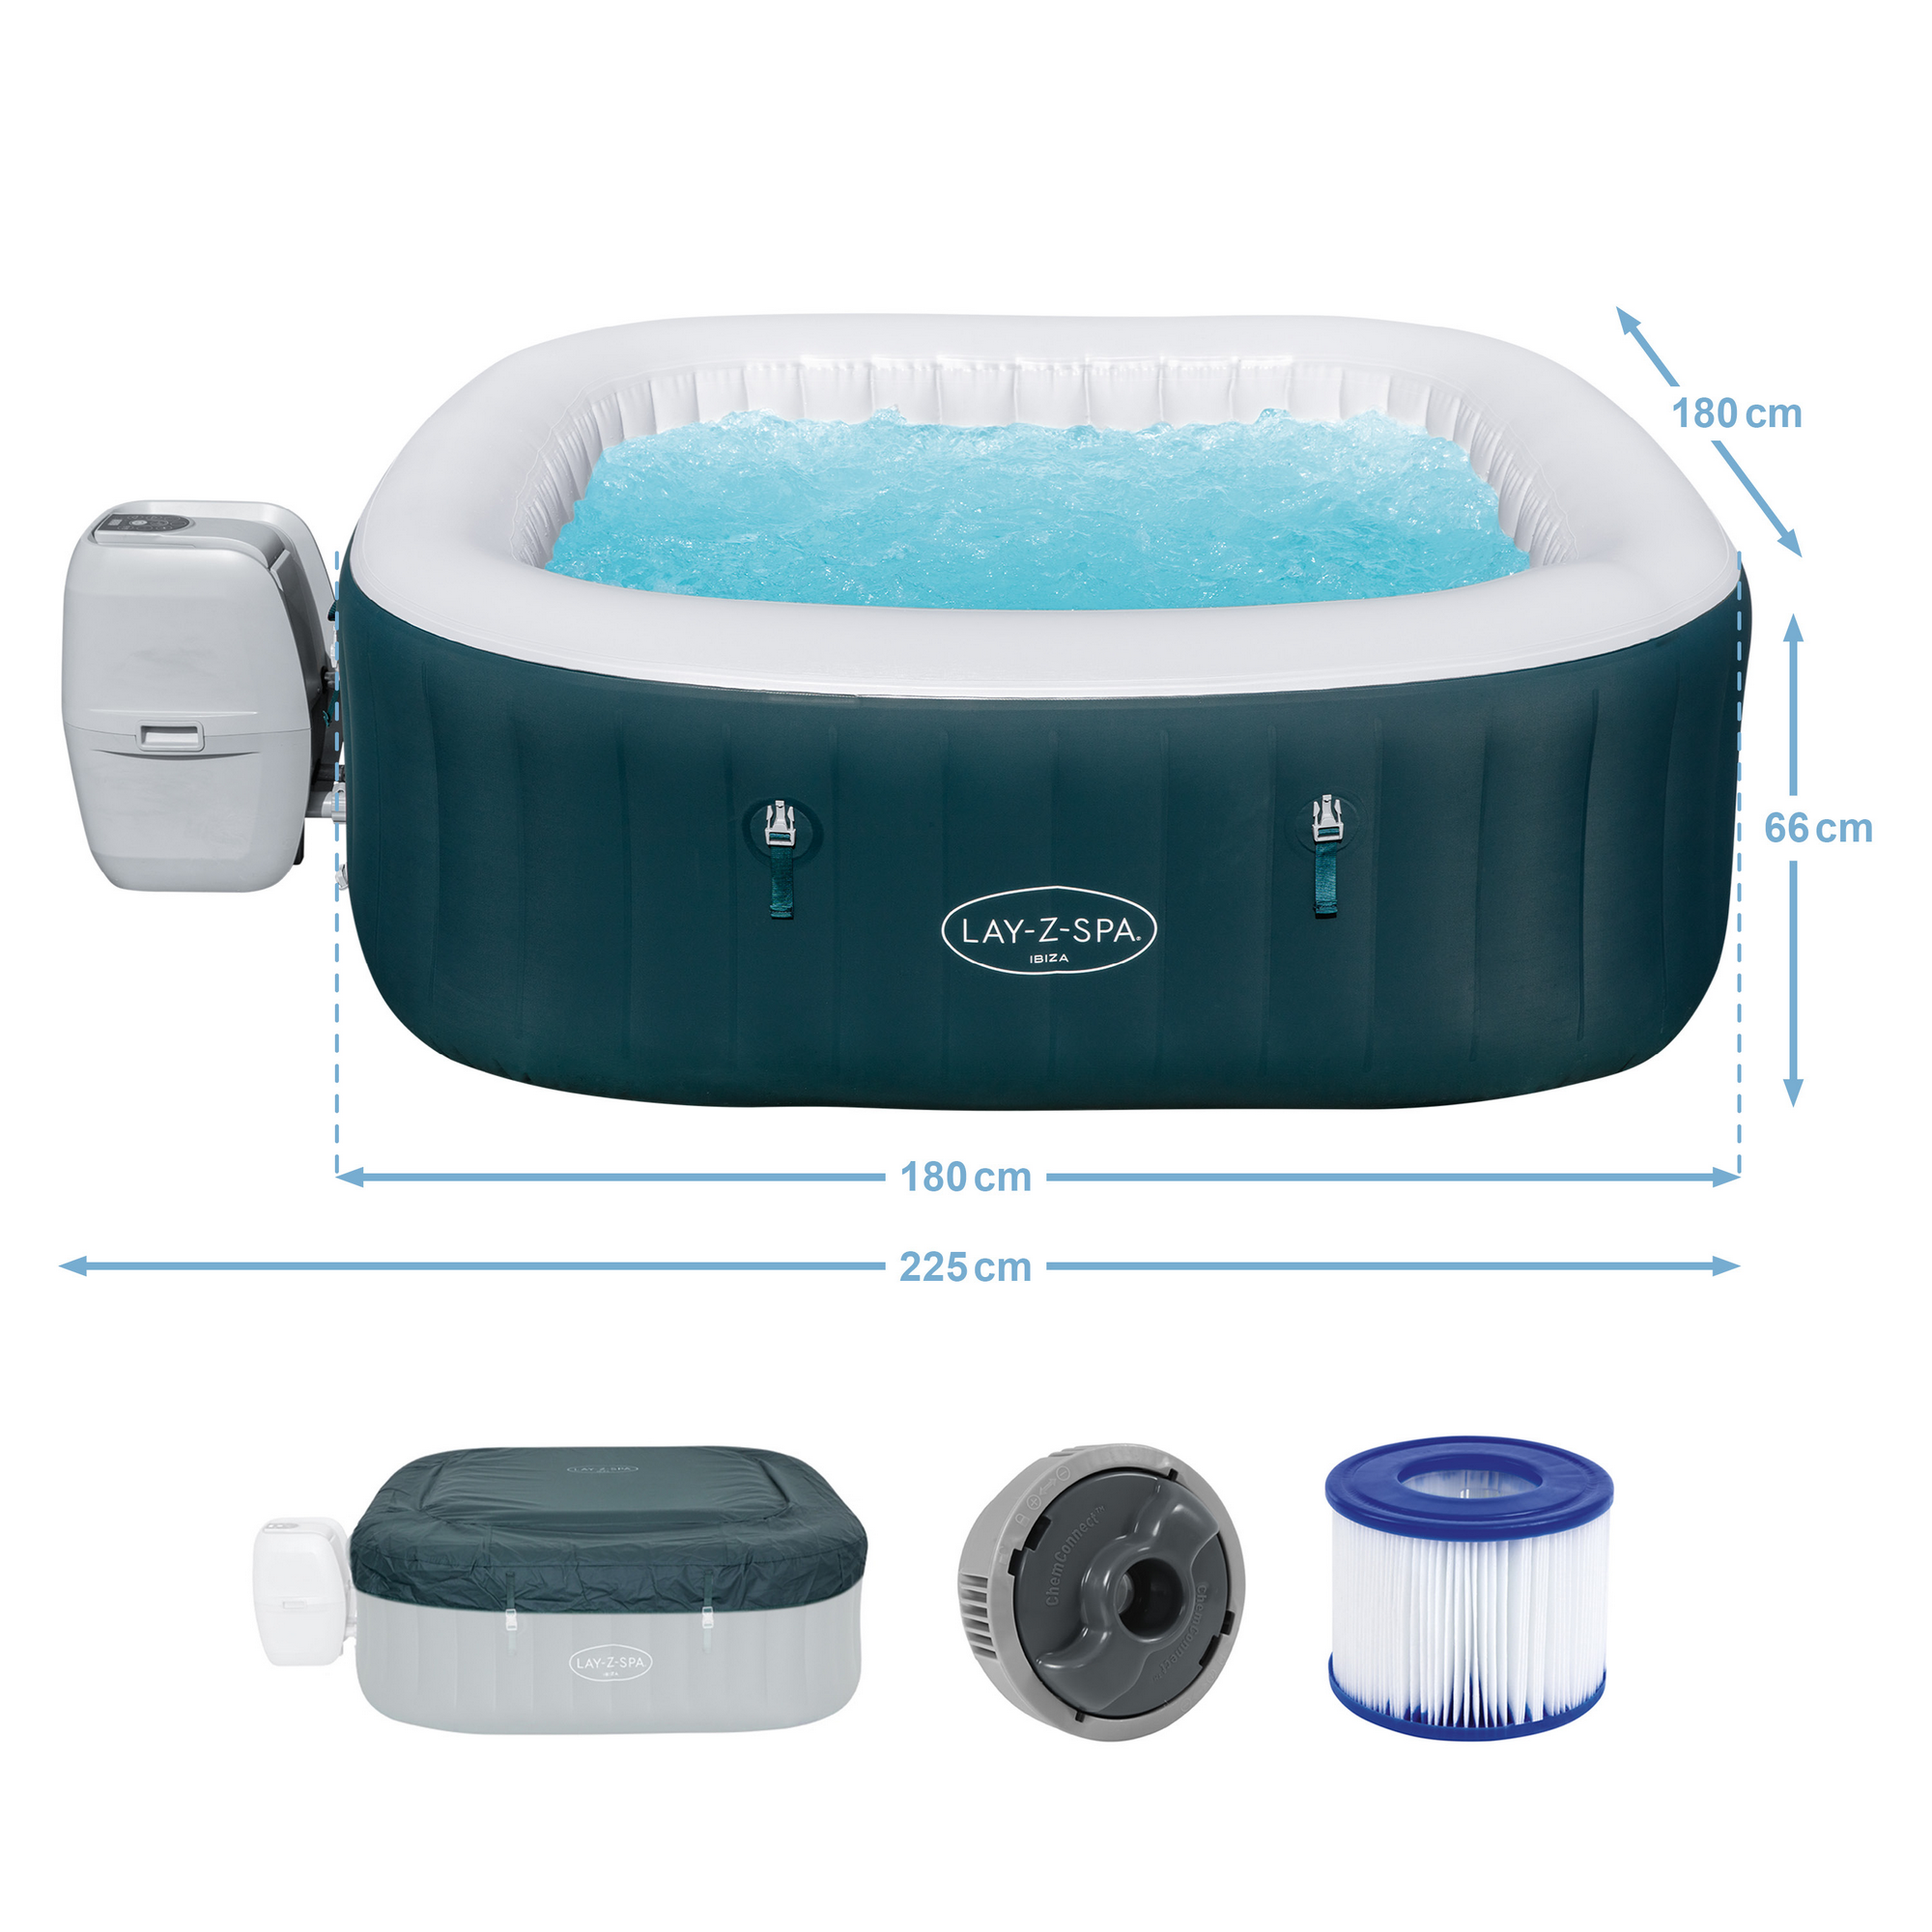 Whirlpool 'LAY-Z-SPA Ibiza AirJet' 180 x 180 x 66 cm dunkelblau + product picture